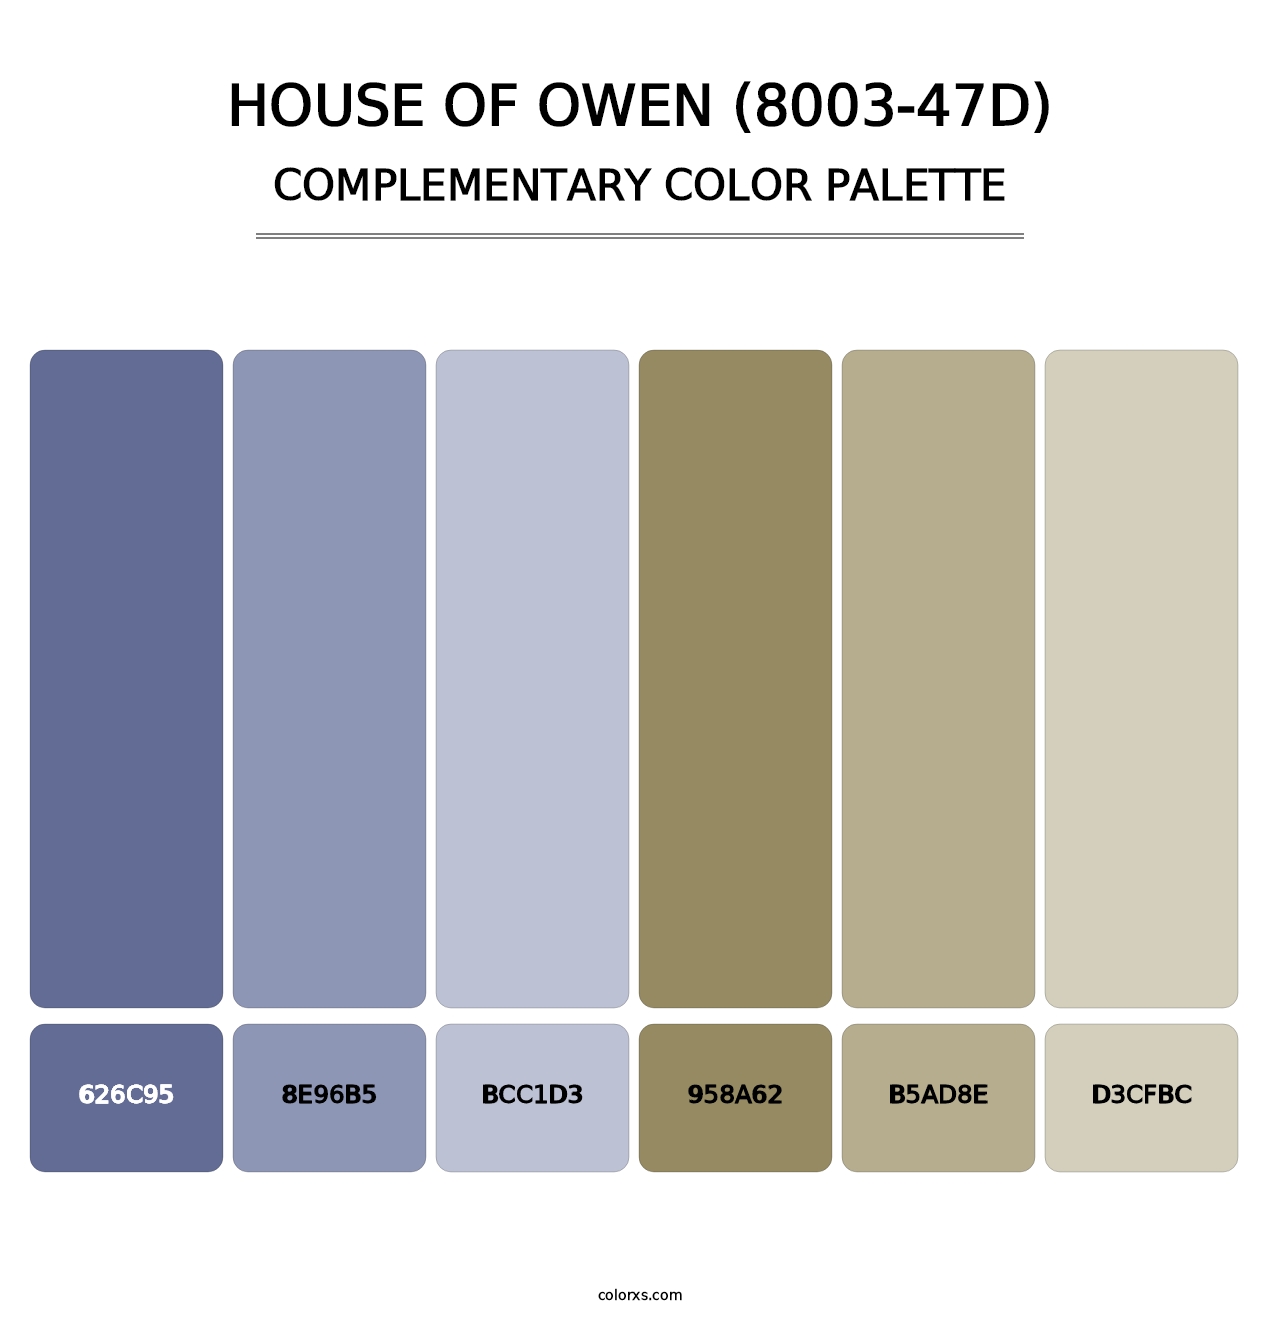 House of Owen (8003-47D) - Complementary Color Palette